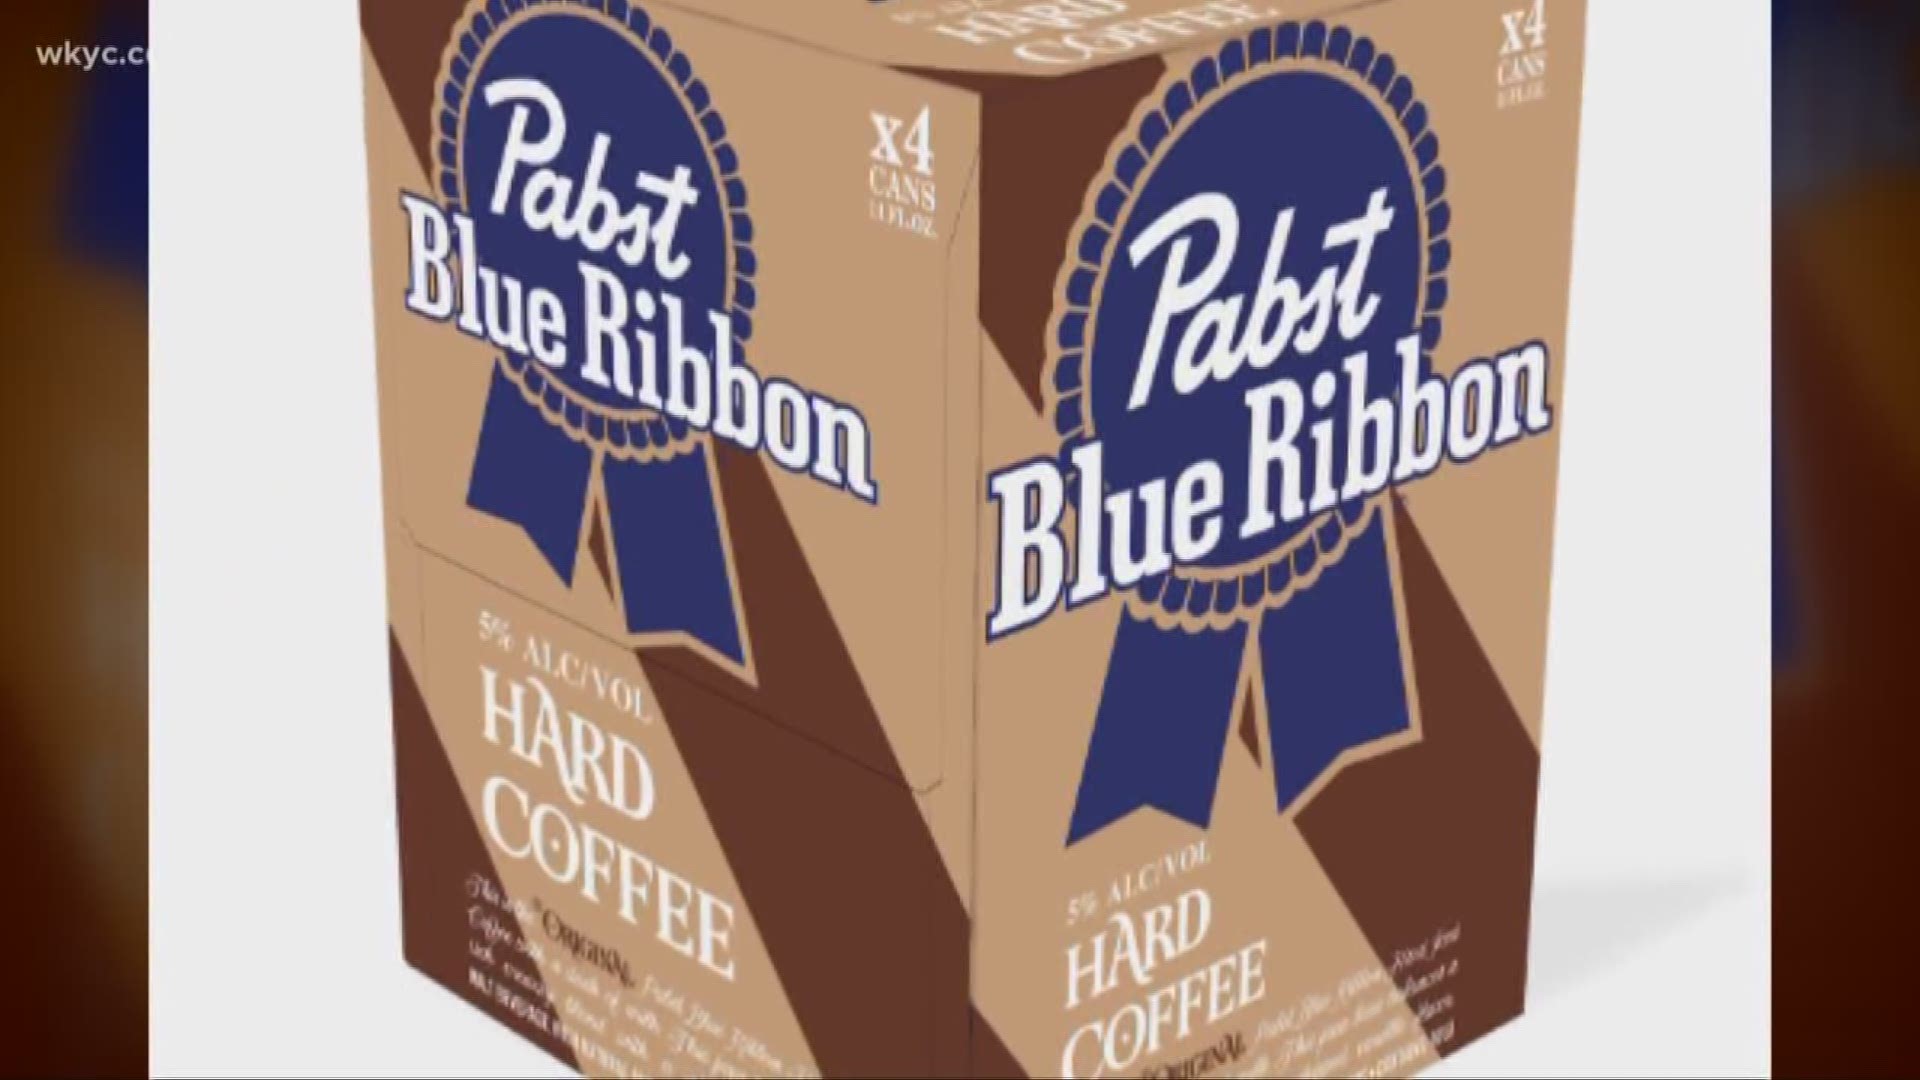 July 3, 2019: Beer and coffee lovers unite for this new concoction courtesy of Pabst Blue Ribbon. The company is now testing 'hard coffee,' which some are describing with a flavor like the chocolate drink Yoo-hoo.